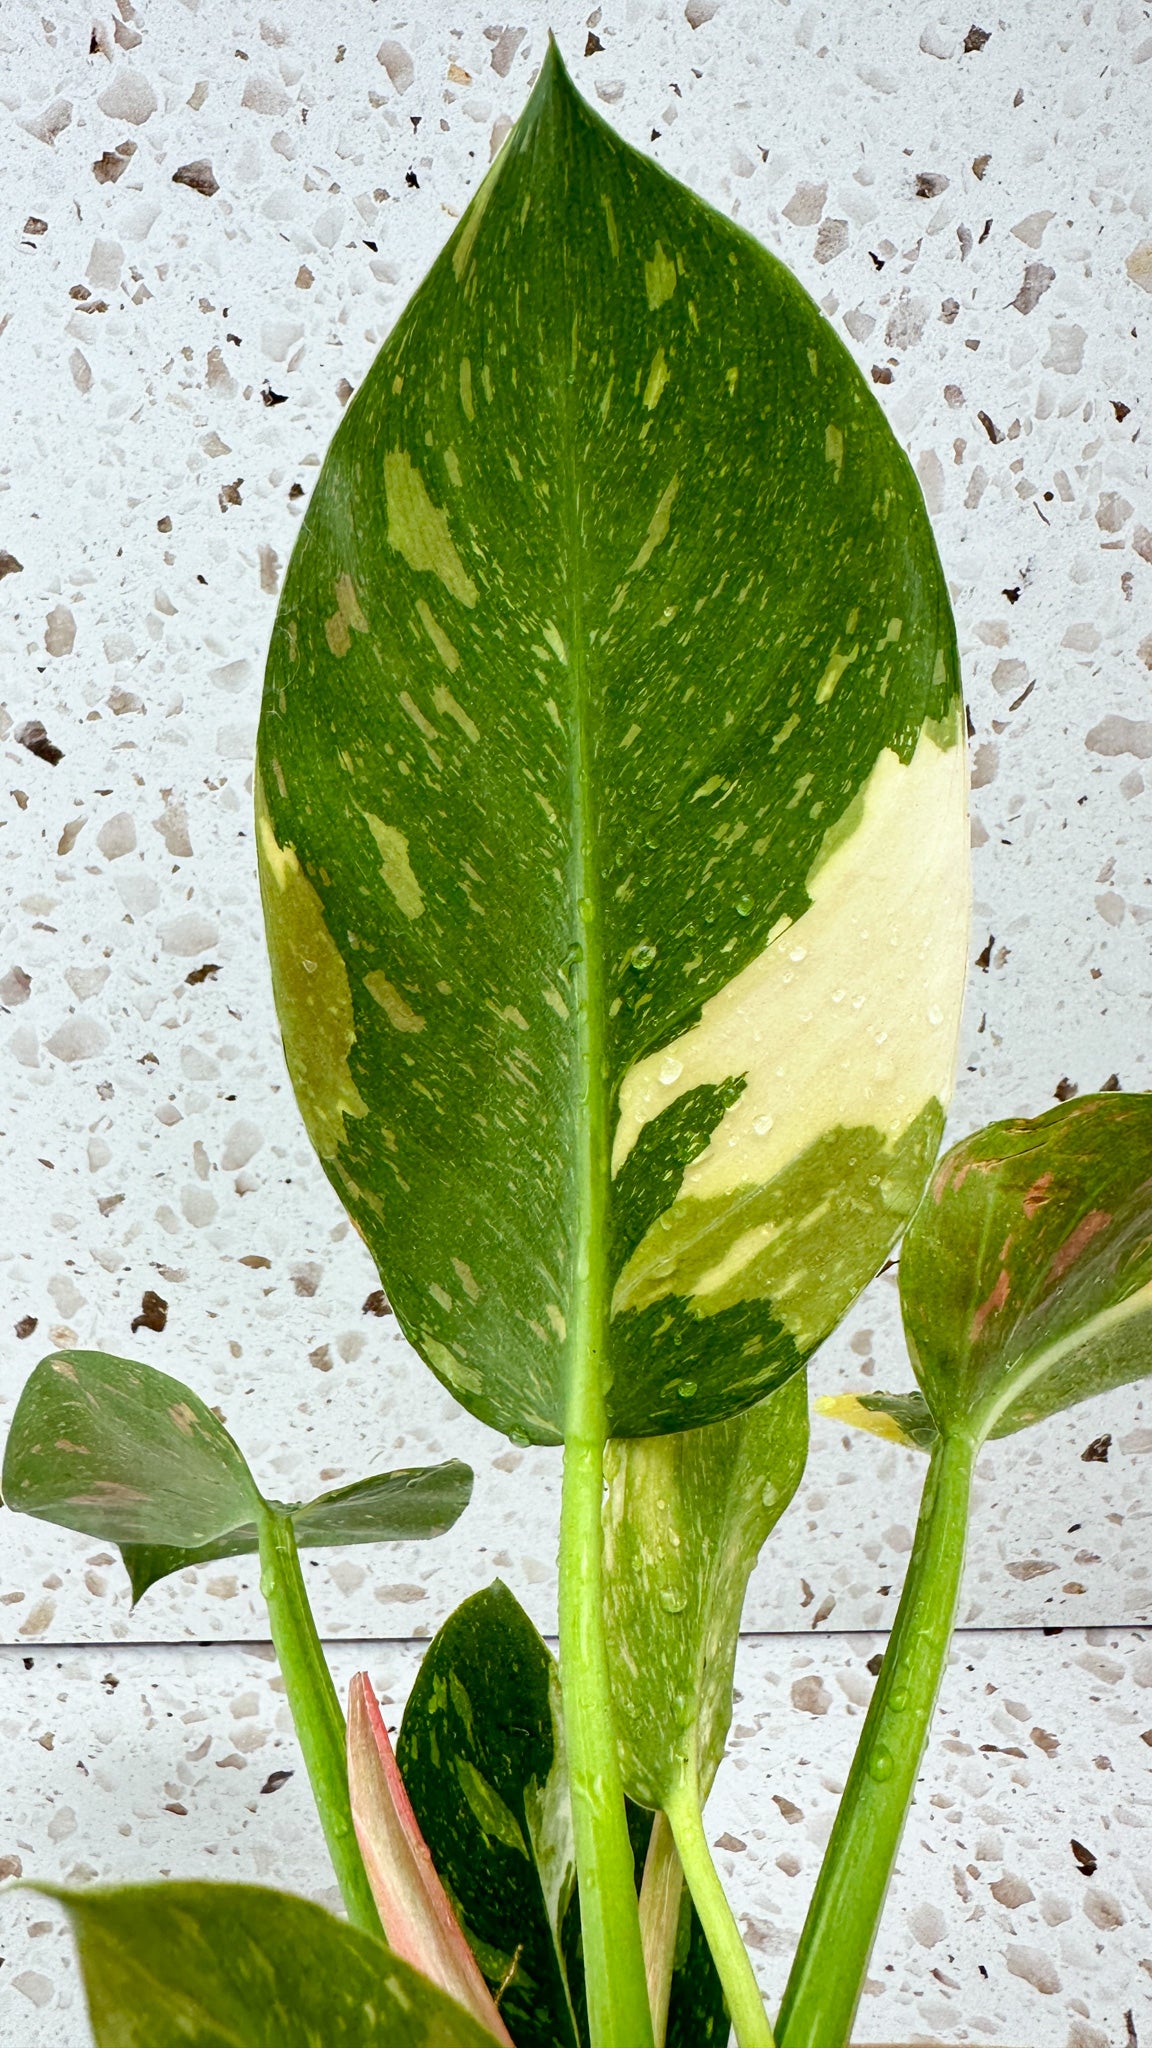 Philodendron Green Congo marble variegated